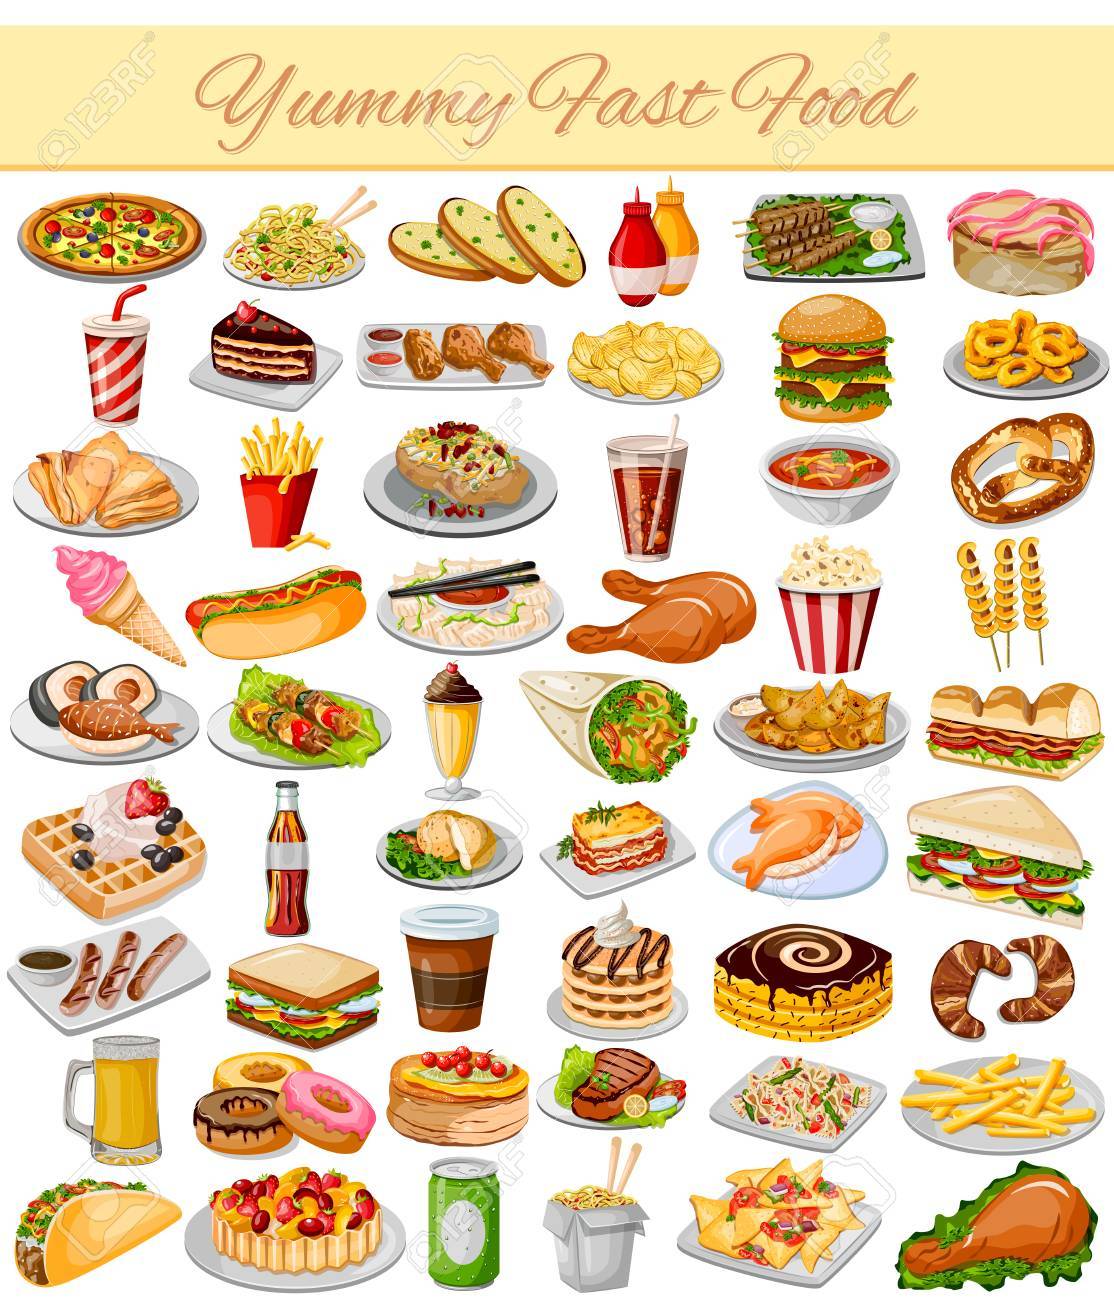 meal clipart yummy food